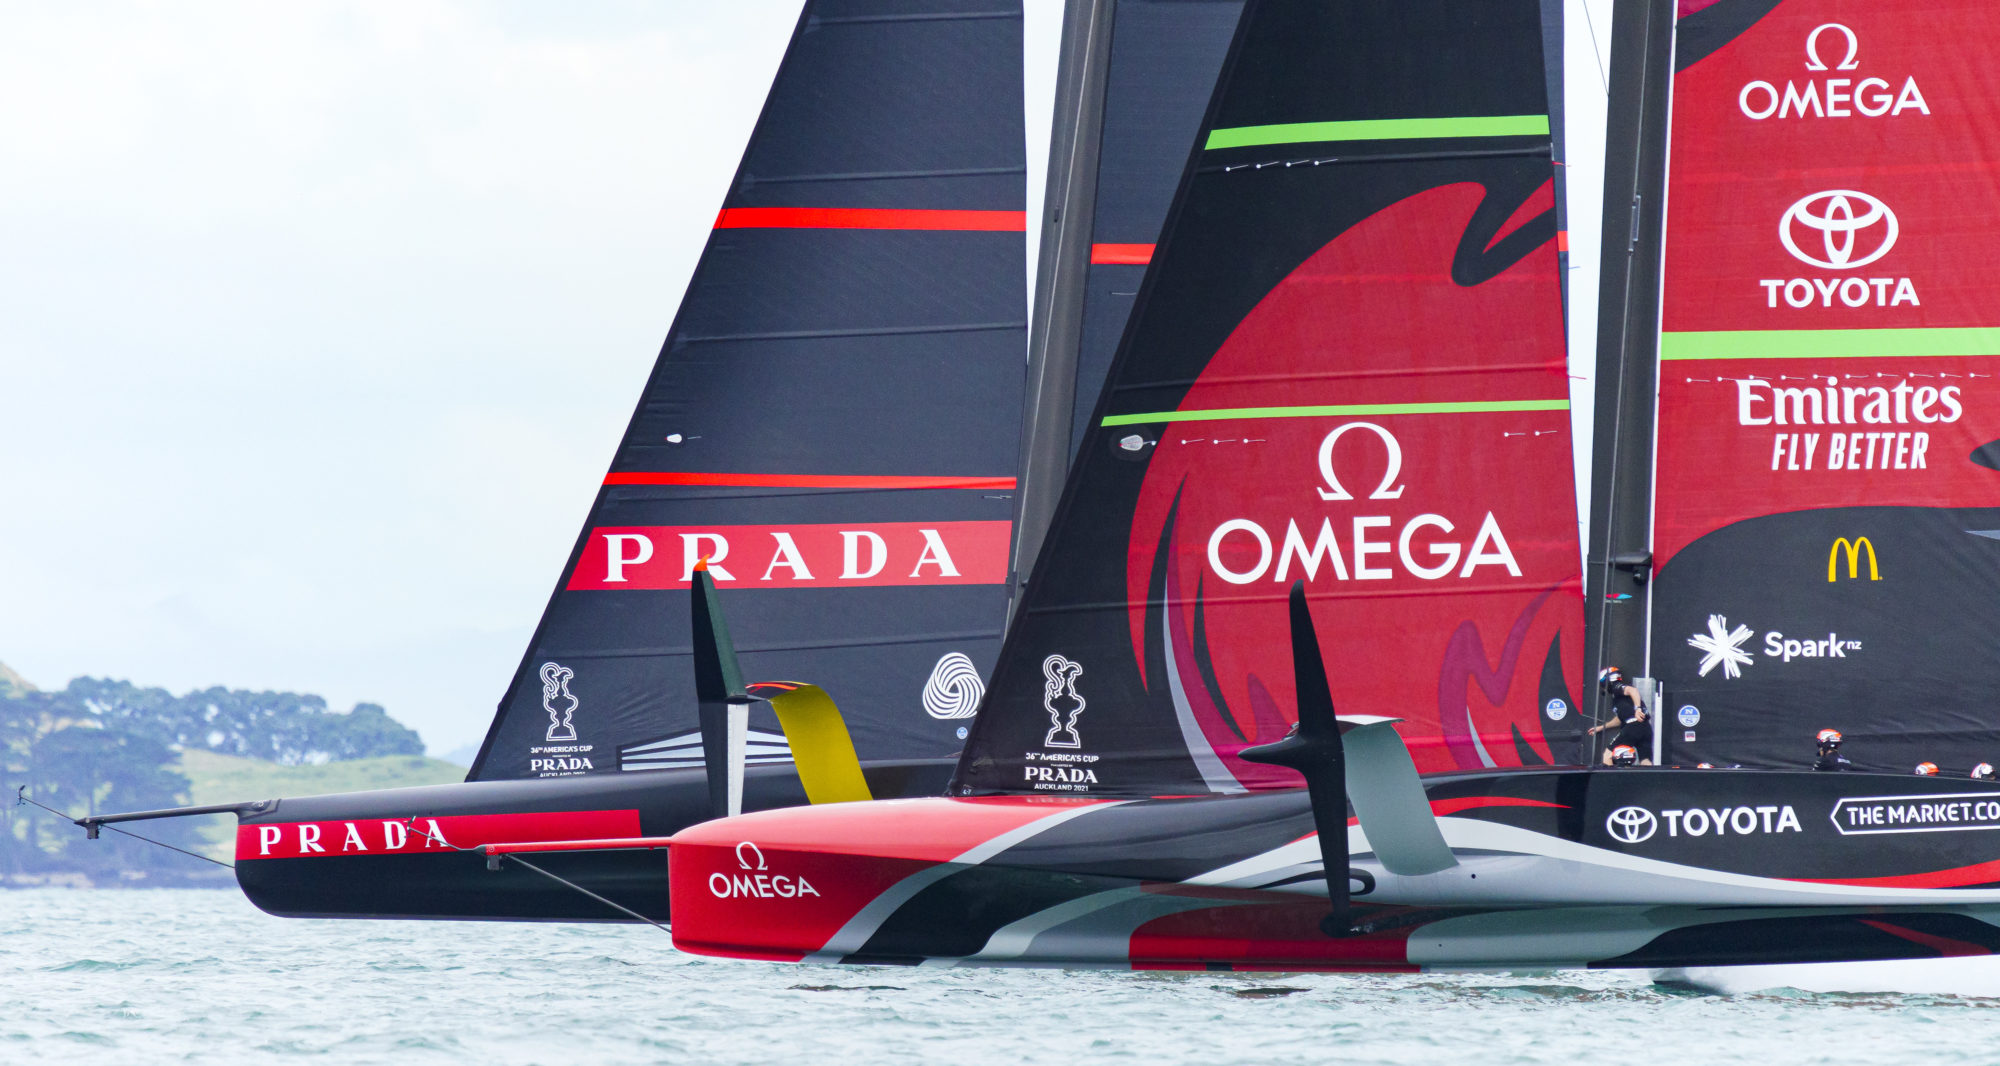 How to watch the America’s Cup Match